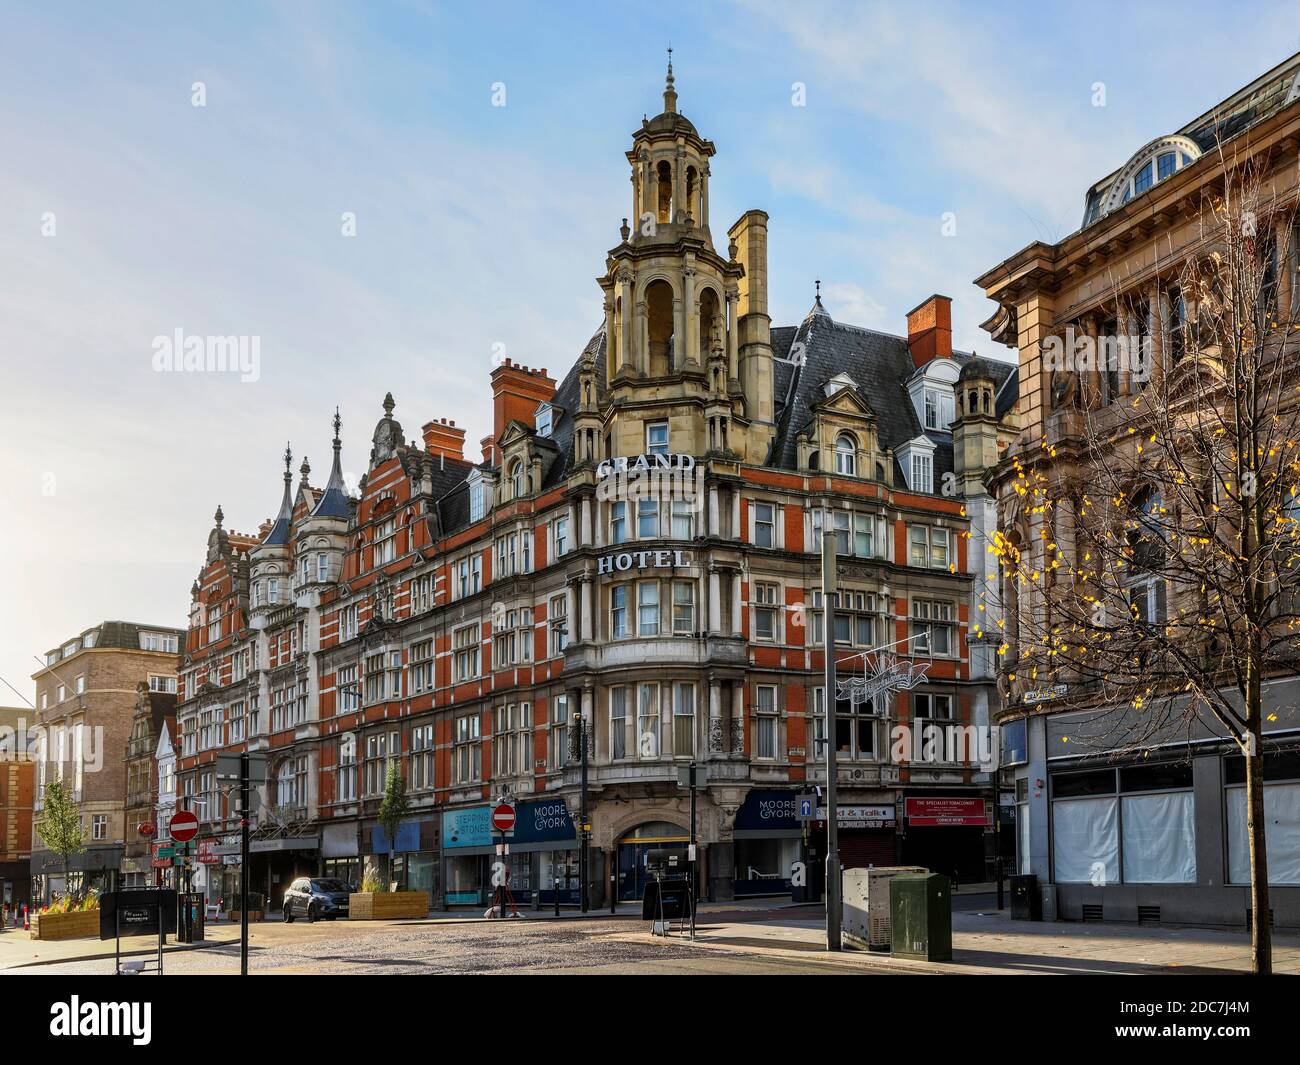 Mecure Leicester Grand Hotel, formerly the Grand Hotel, a Grade II listed Victorian hotel on Granby Street, Leicester, England Stock Photo